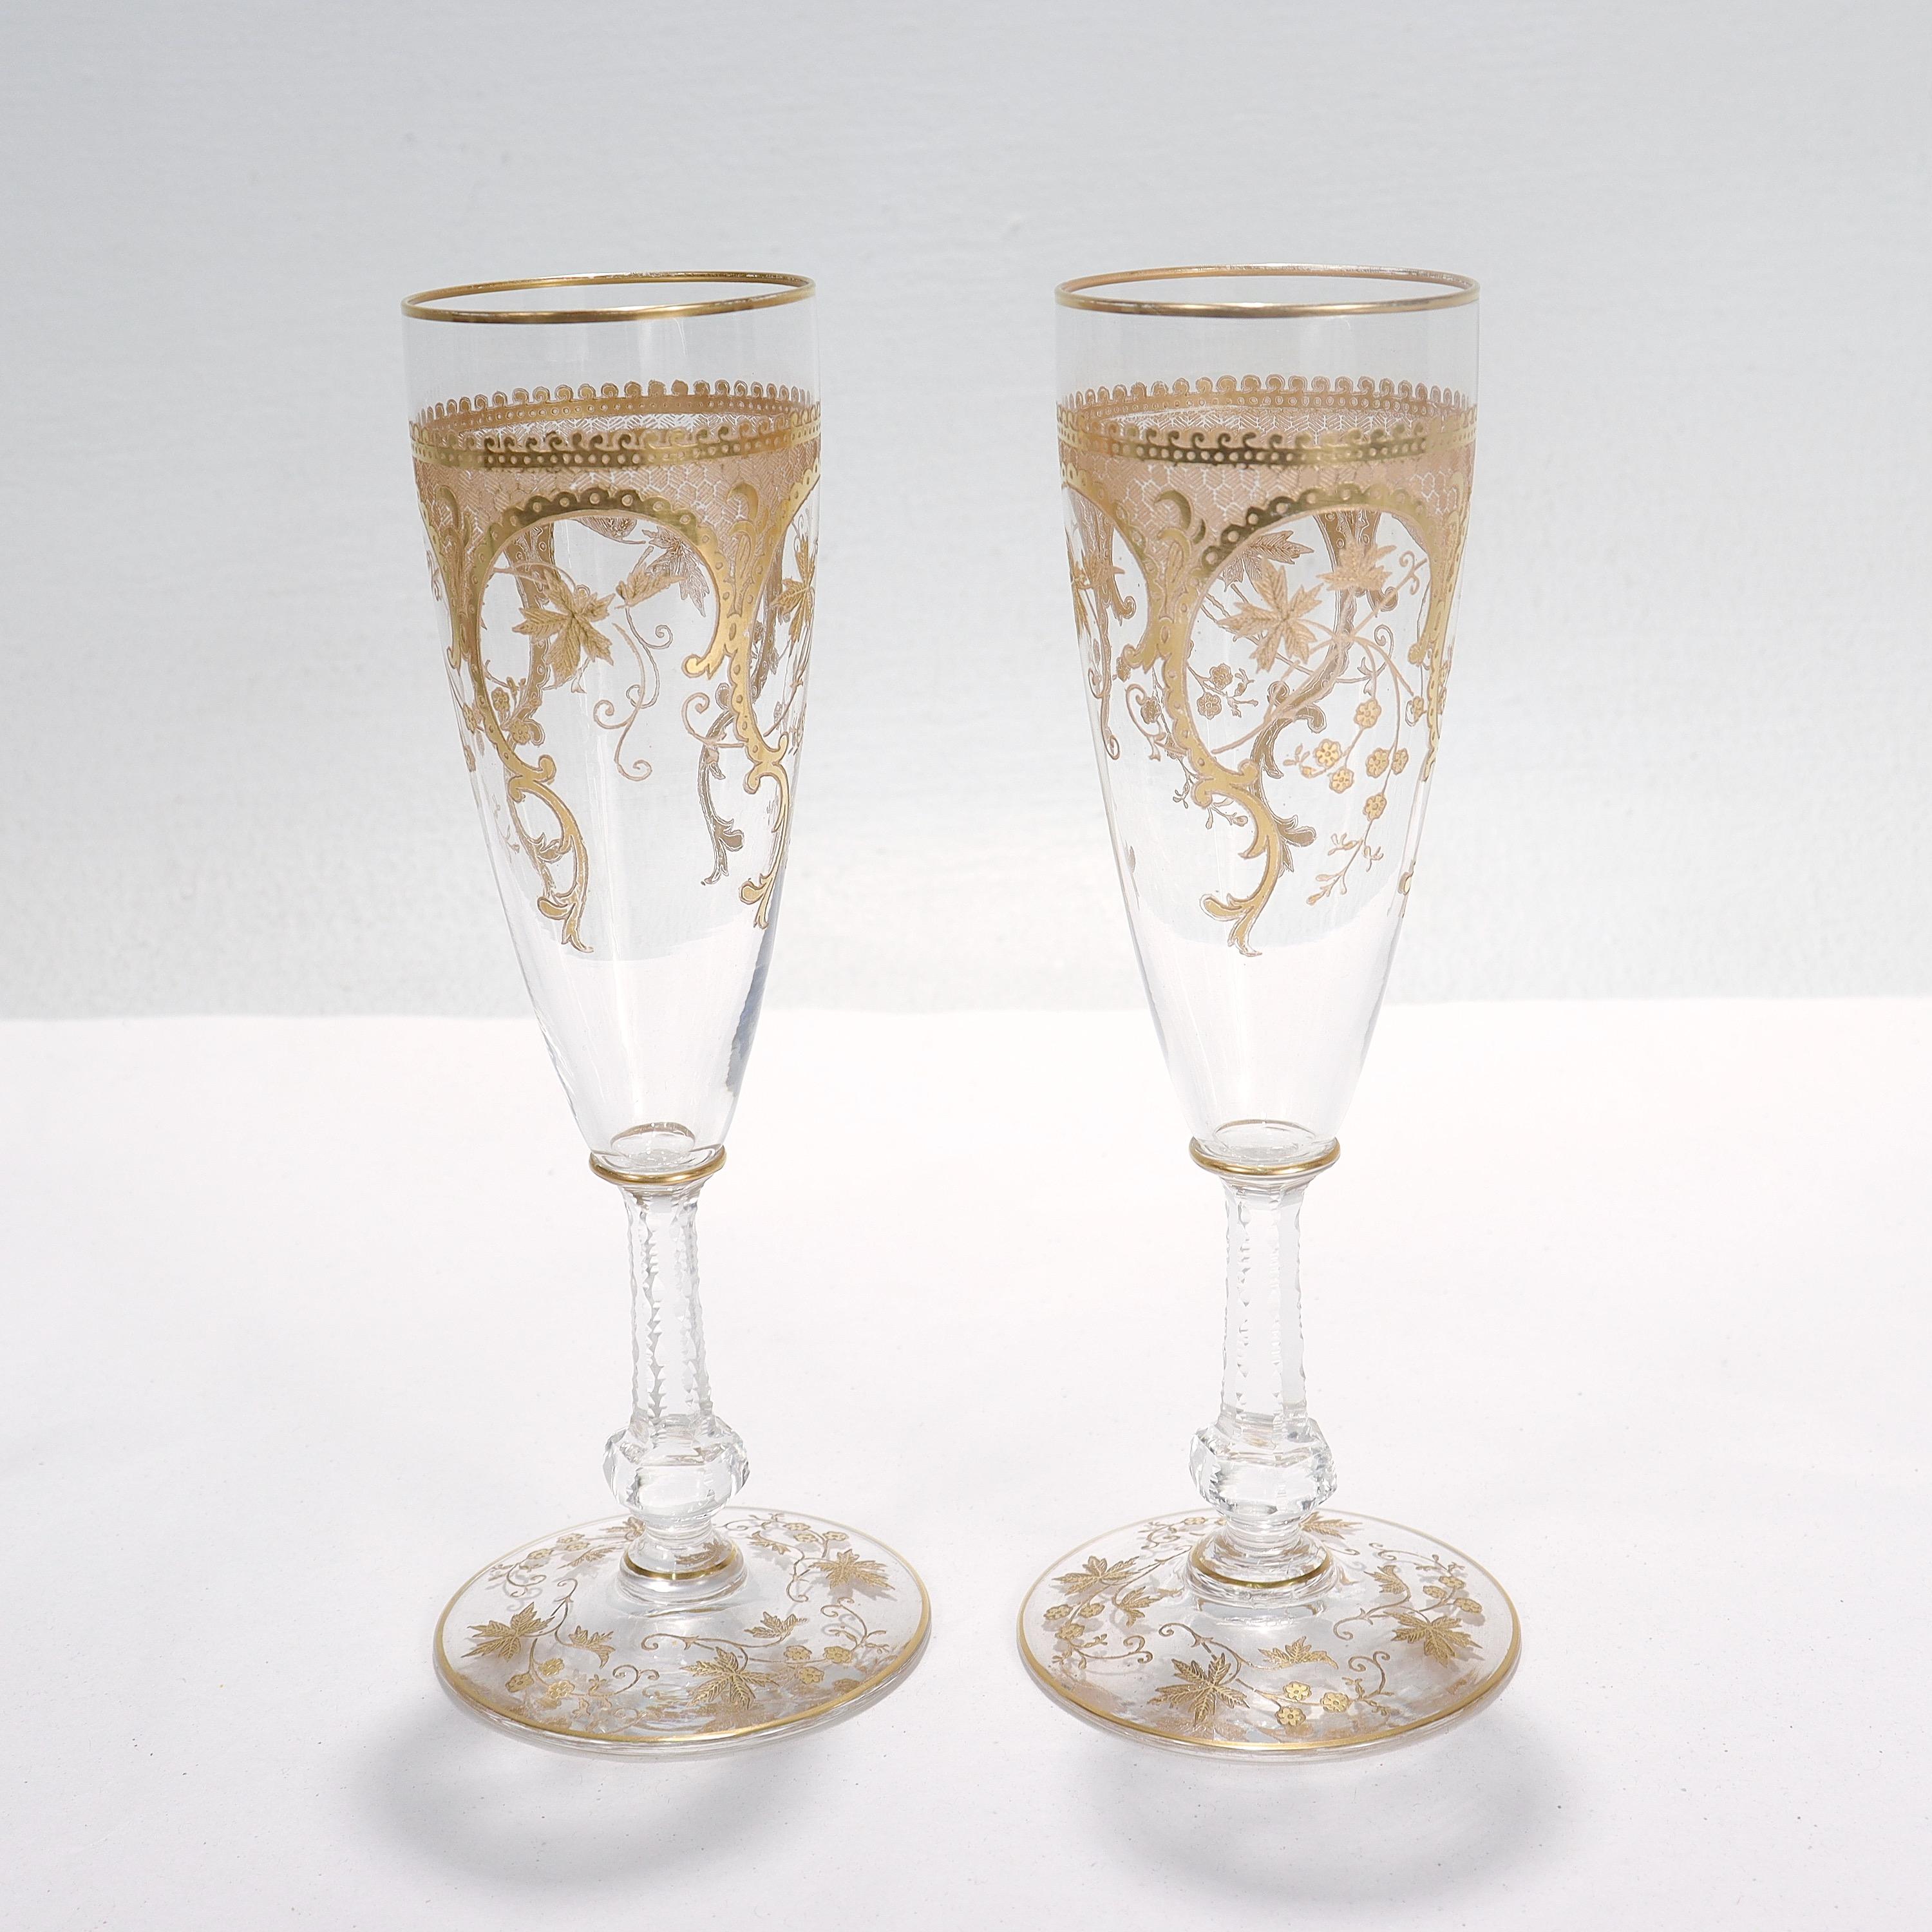 20th Century Pair of Richly Gilt Antique Etched & Cut Glass Champagne Stems / Toasting Flutes